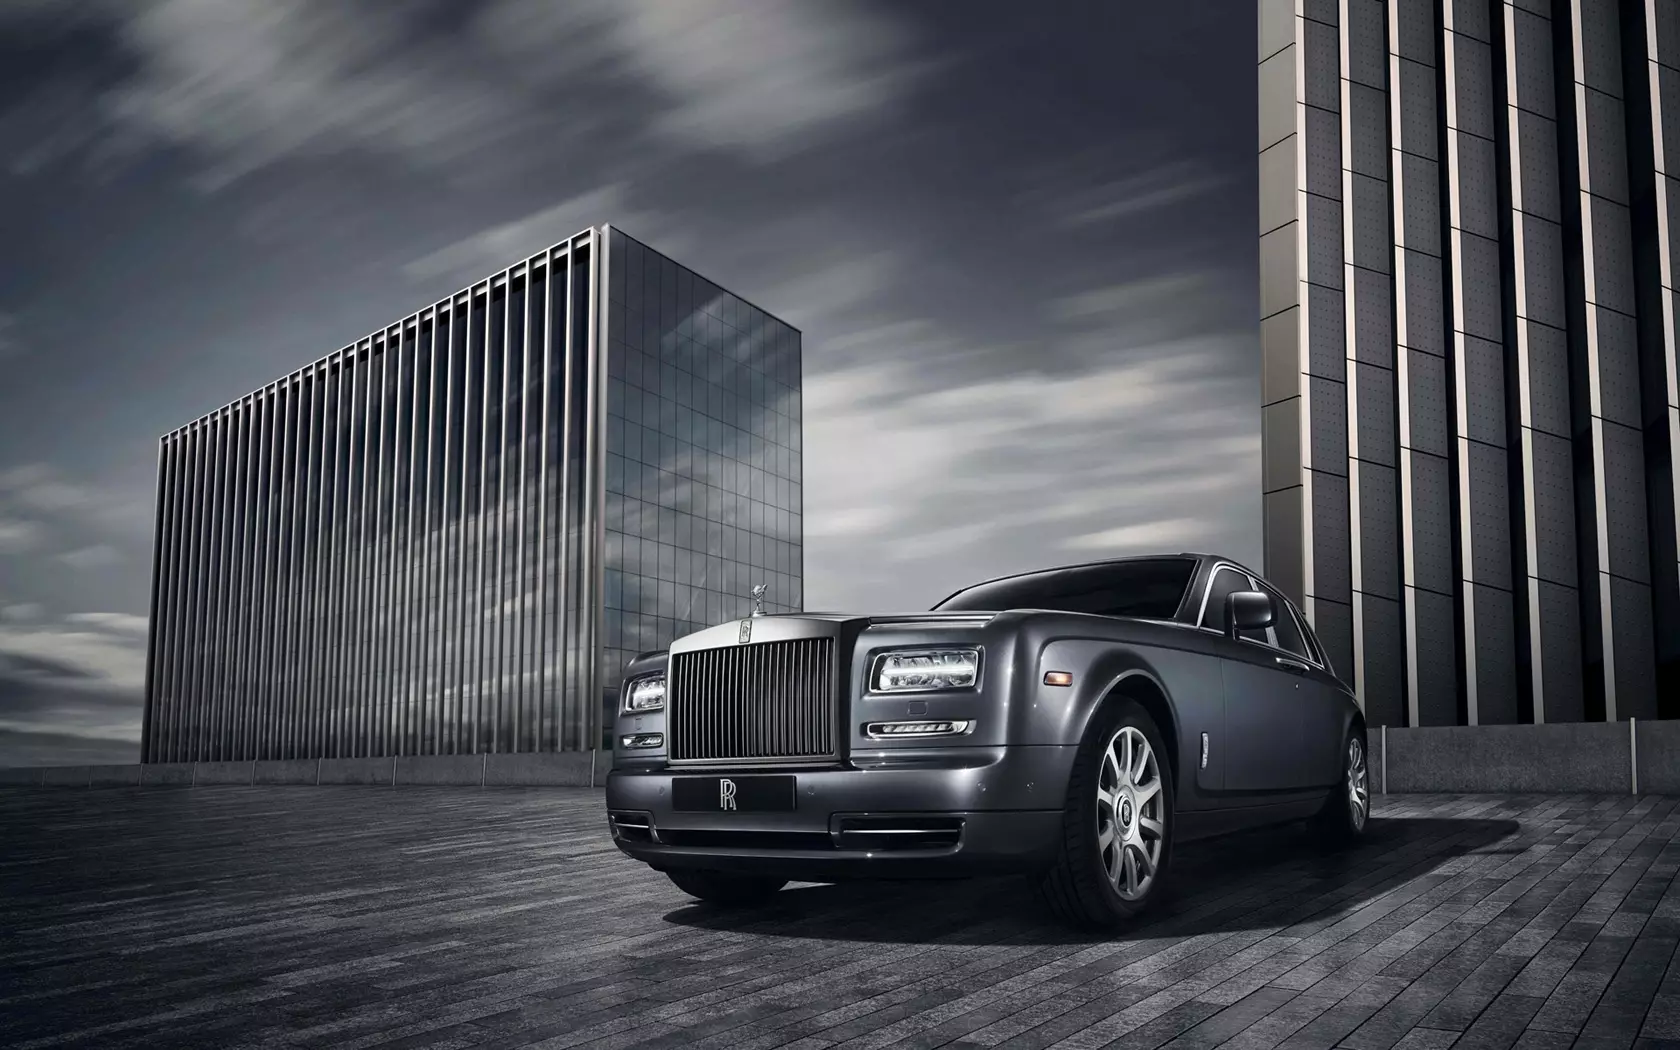 Rolls Royce Phantom Metropolitan Collection: Exclusiveness without limits